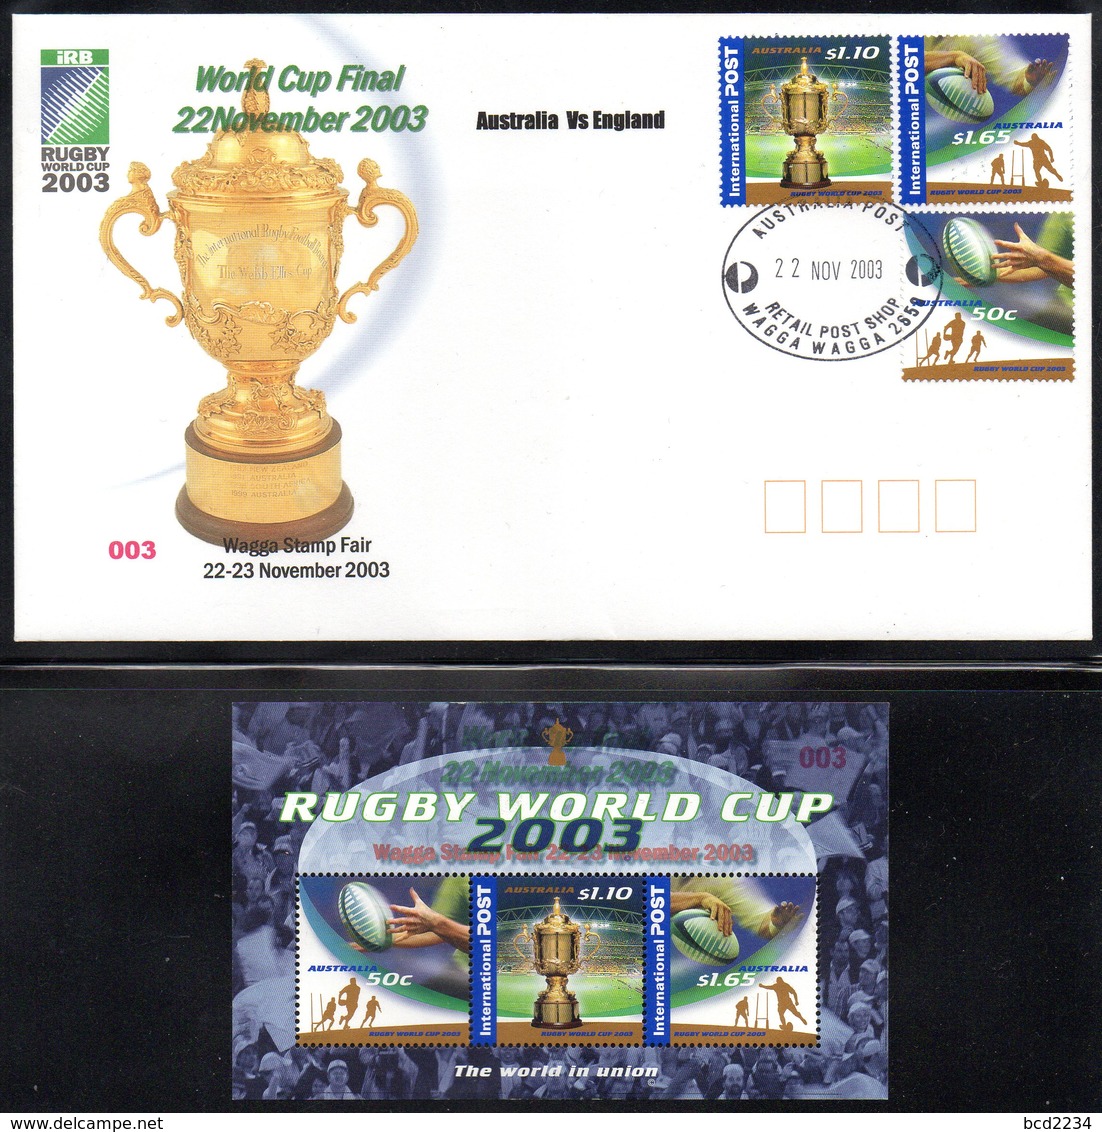 AUSTRALIA 2003 VERY SCARCE WAGGA STAMP FAIR OVERPRINT NUMBER 003 IN RED ON MS & COVER 1ST DAY OF FAIR RUGBY WORLD CUP - Errors, Freaks & Oddities (EFO)